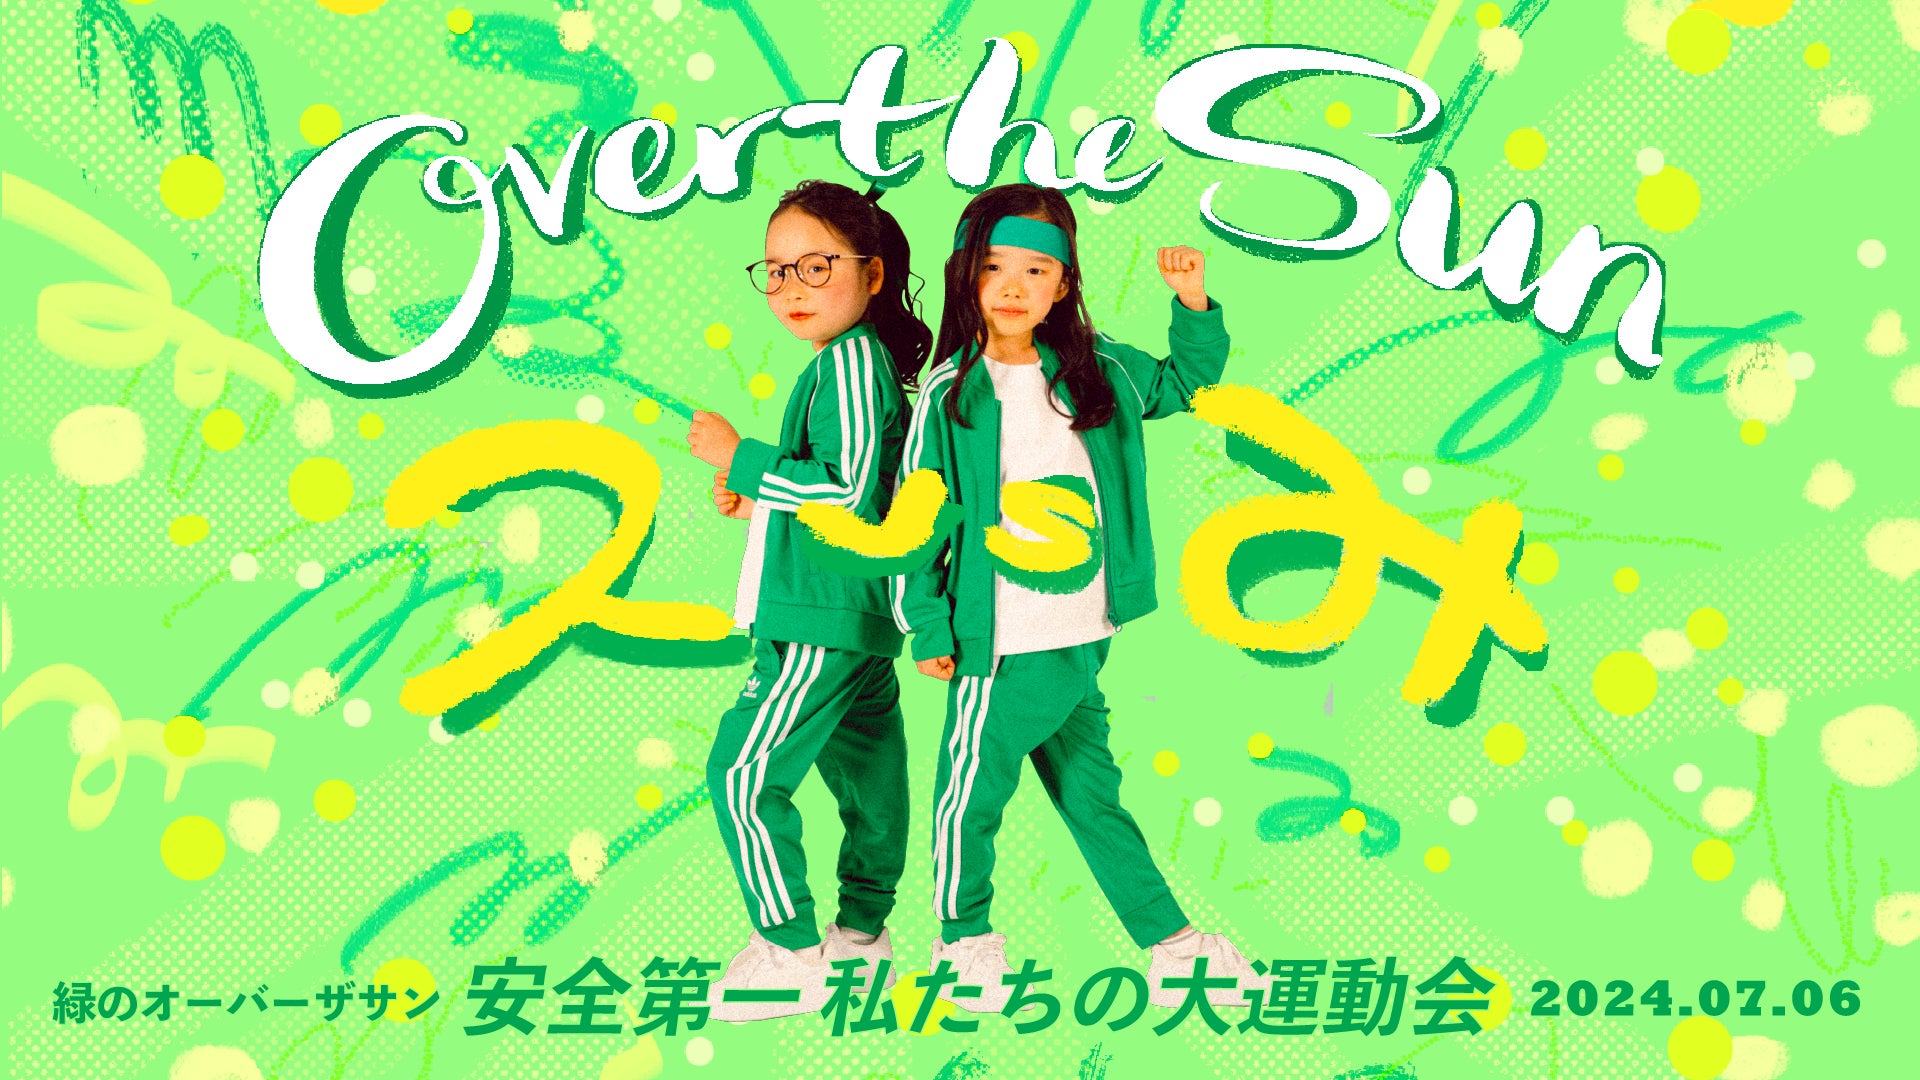 TBS Podcast『OVER THE SUN』大運動会の競技種目とチケット詳細が発表に！